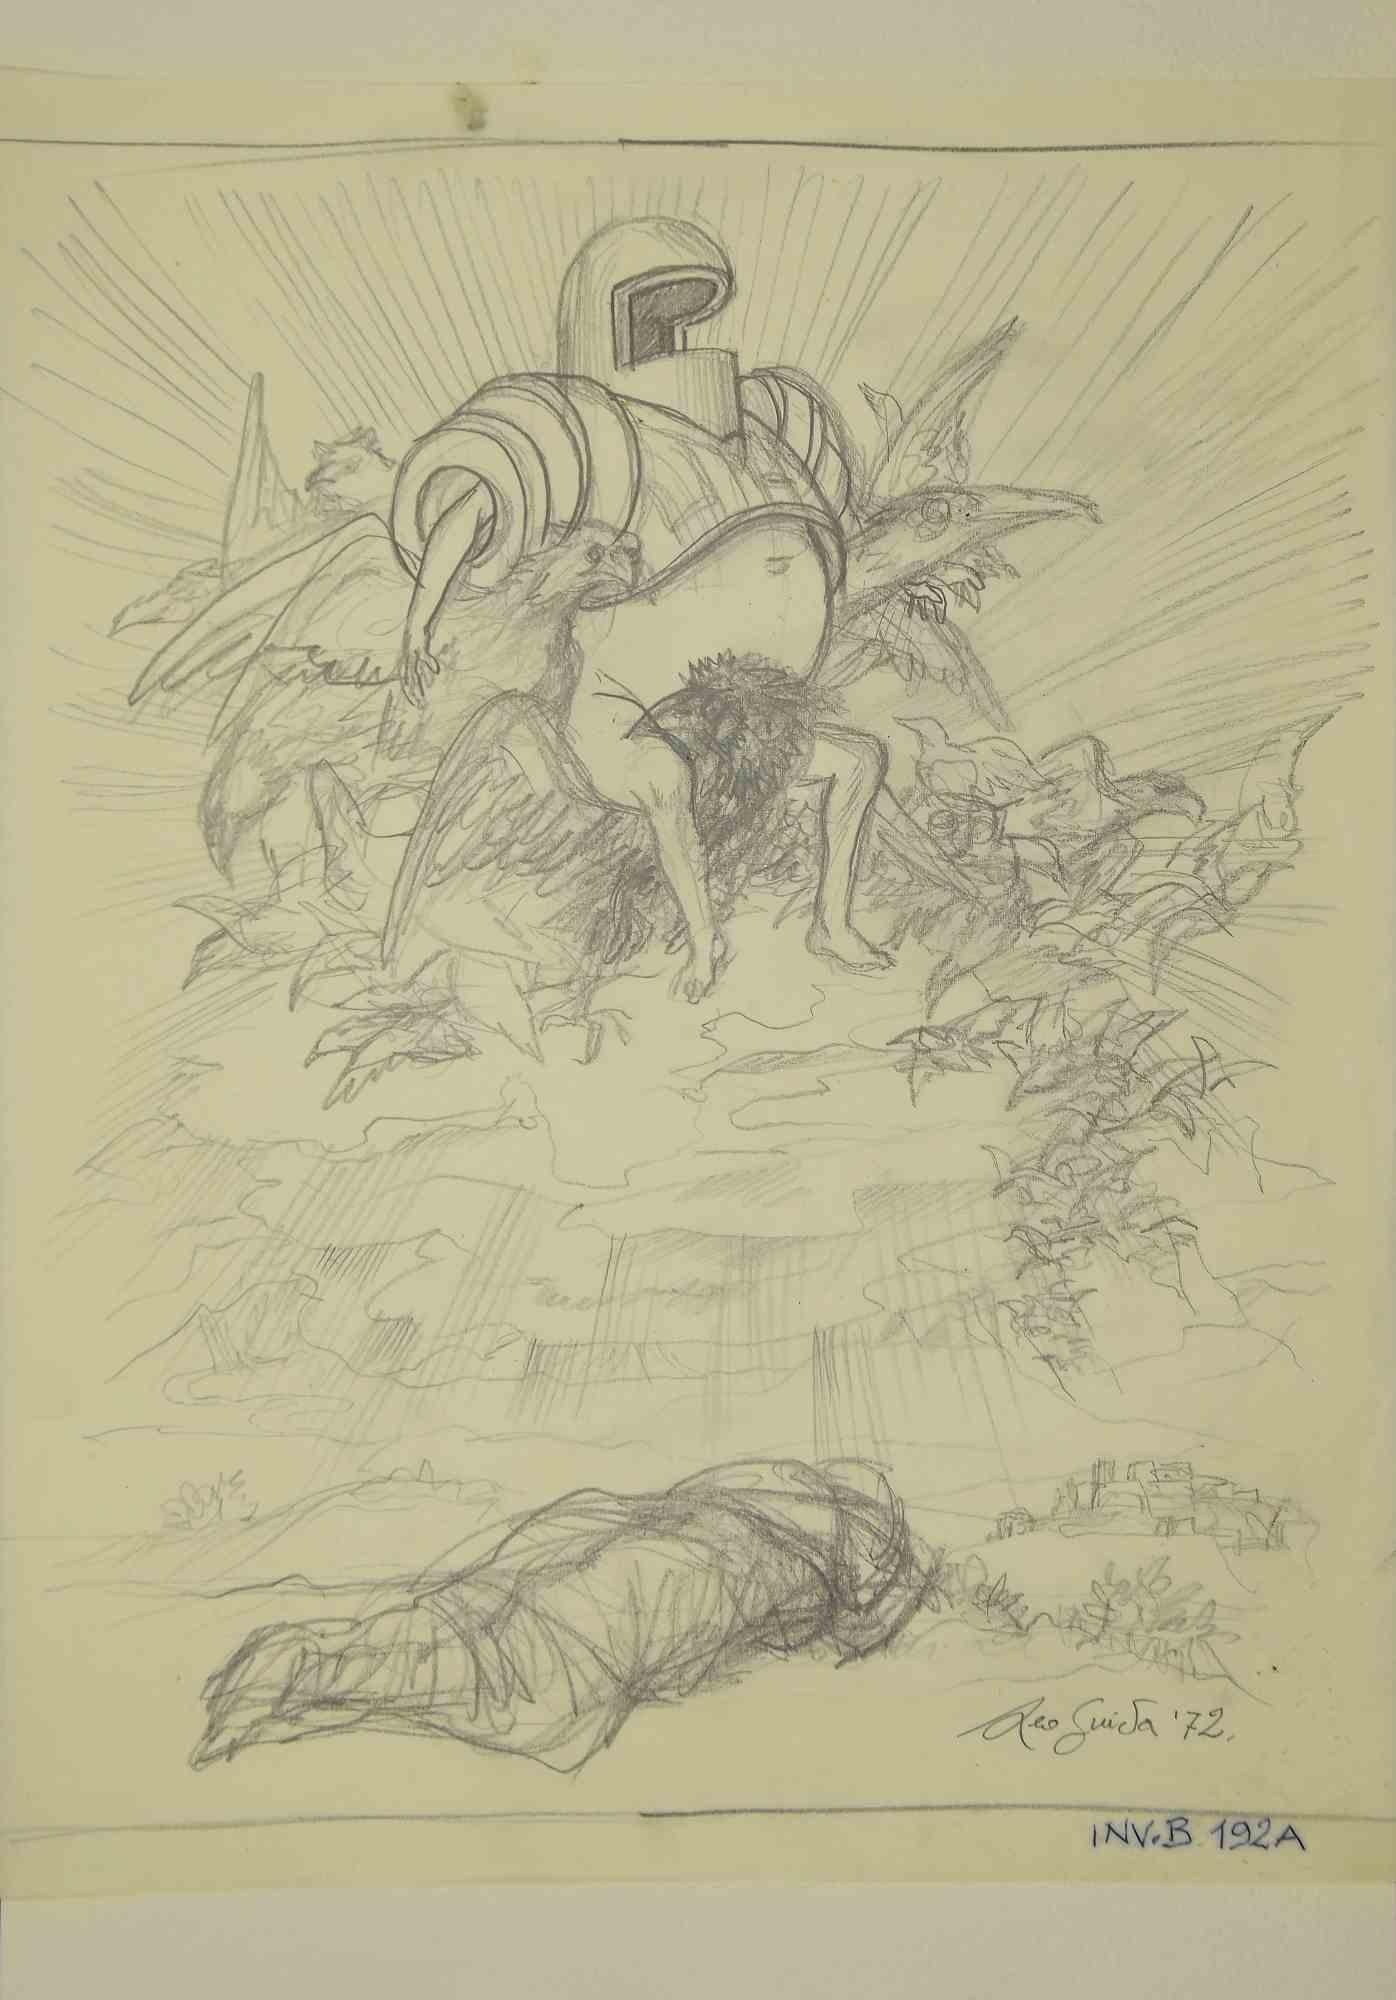 Knight on a Winged Throne is an original drawing in pencil realized by Leo Guida in 1972.

Good condition. except for being aged.

Leo Guida  (1992 - 2017). Sensitive to current issues, artistic movements and historical techniques, Leo Guida has